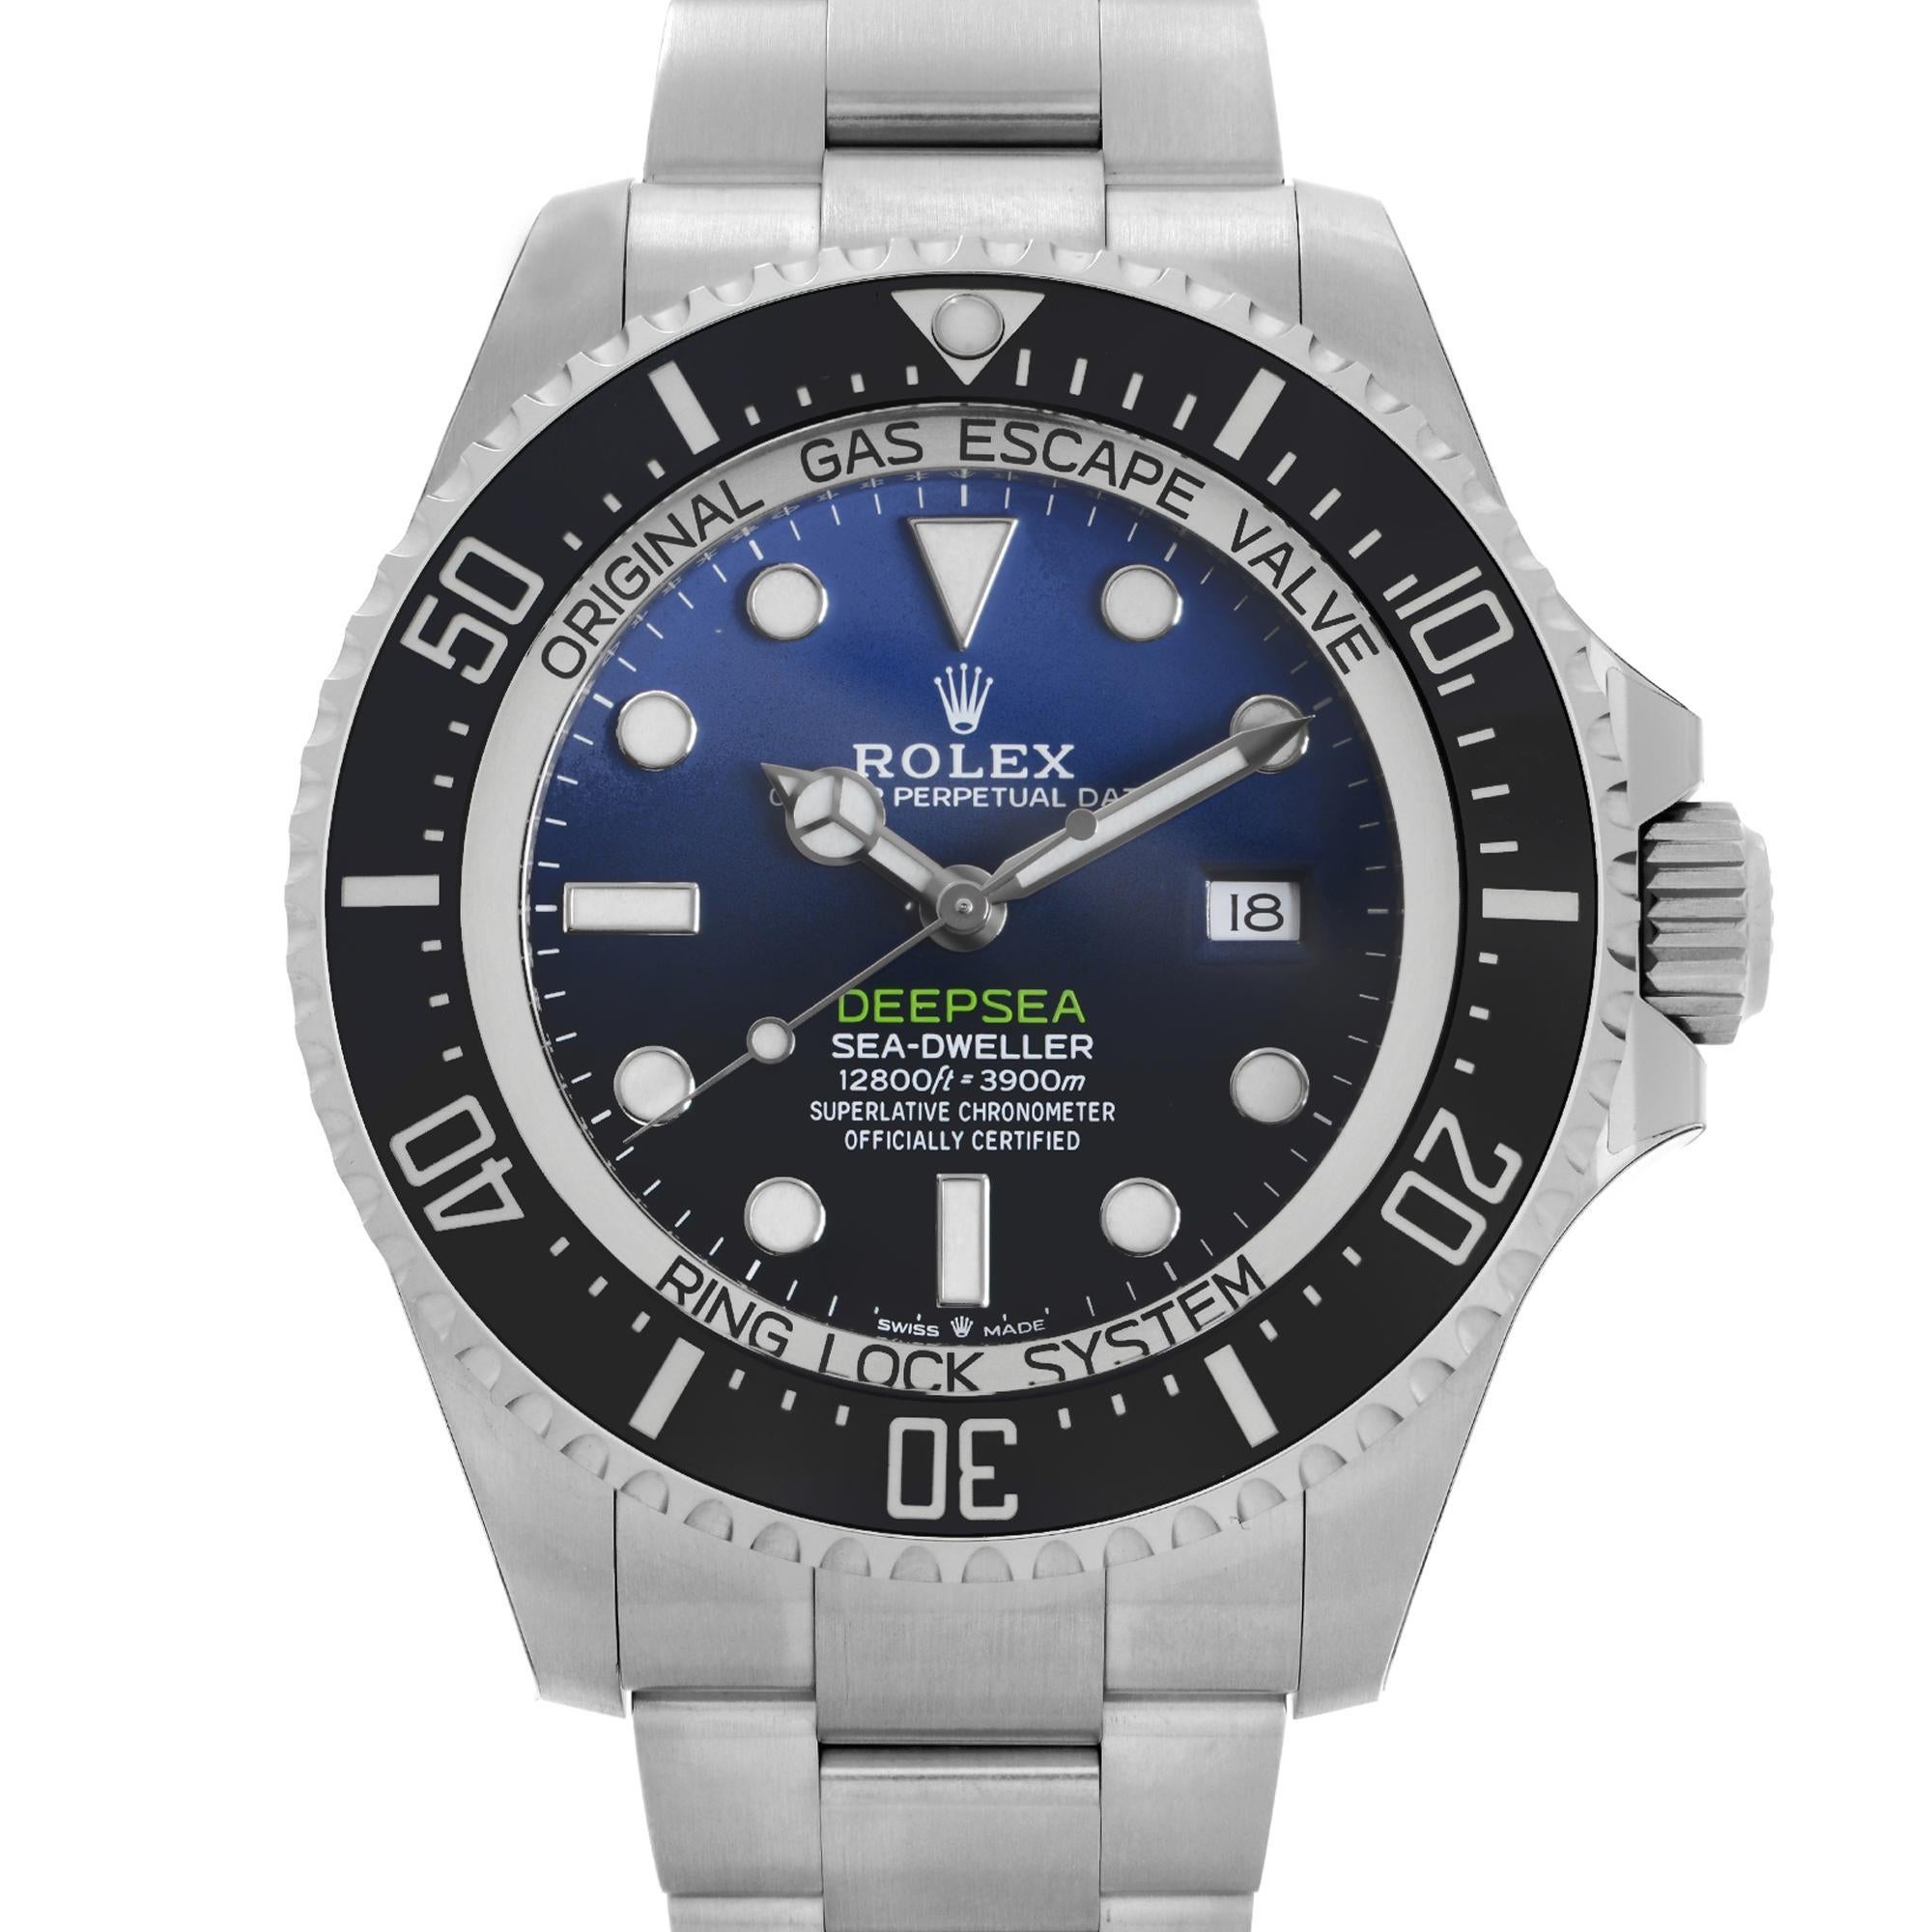 Unworn Fully Sticker Rolex Sea Dweller Deepsea James Cameron Blue Dial Steel Ceramic Watch 126660. This Beautiful Men's Timepiece is Powered By an Automatic Movement and Features: Stainless Steed Case with a Stainless Steel Oyster Bracelet.